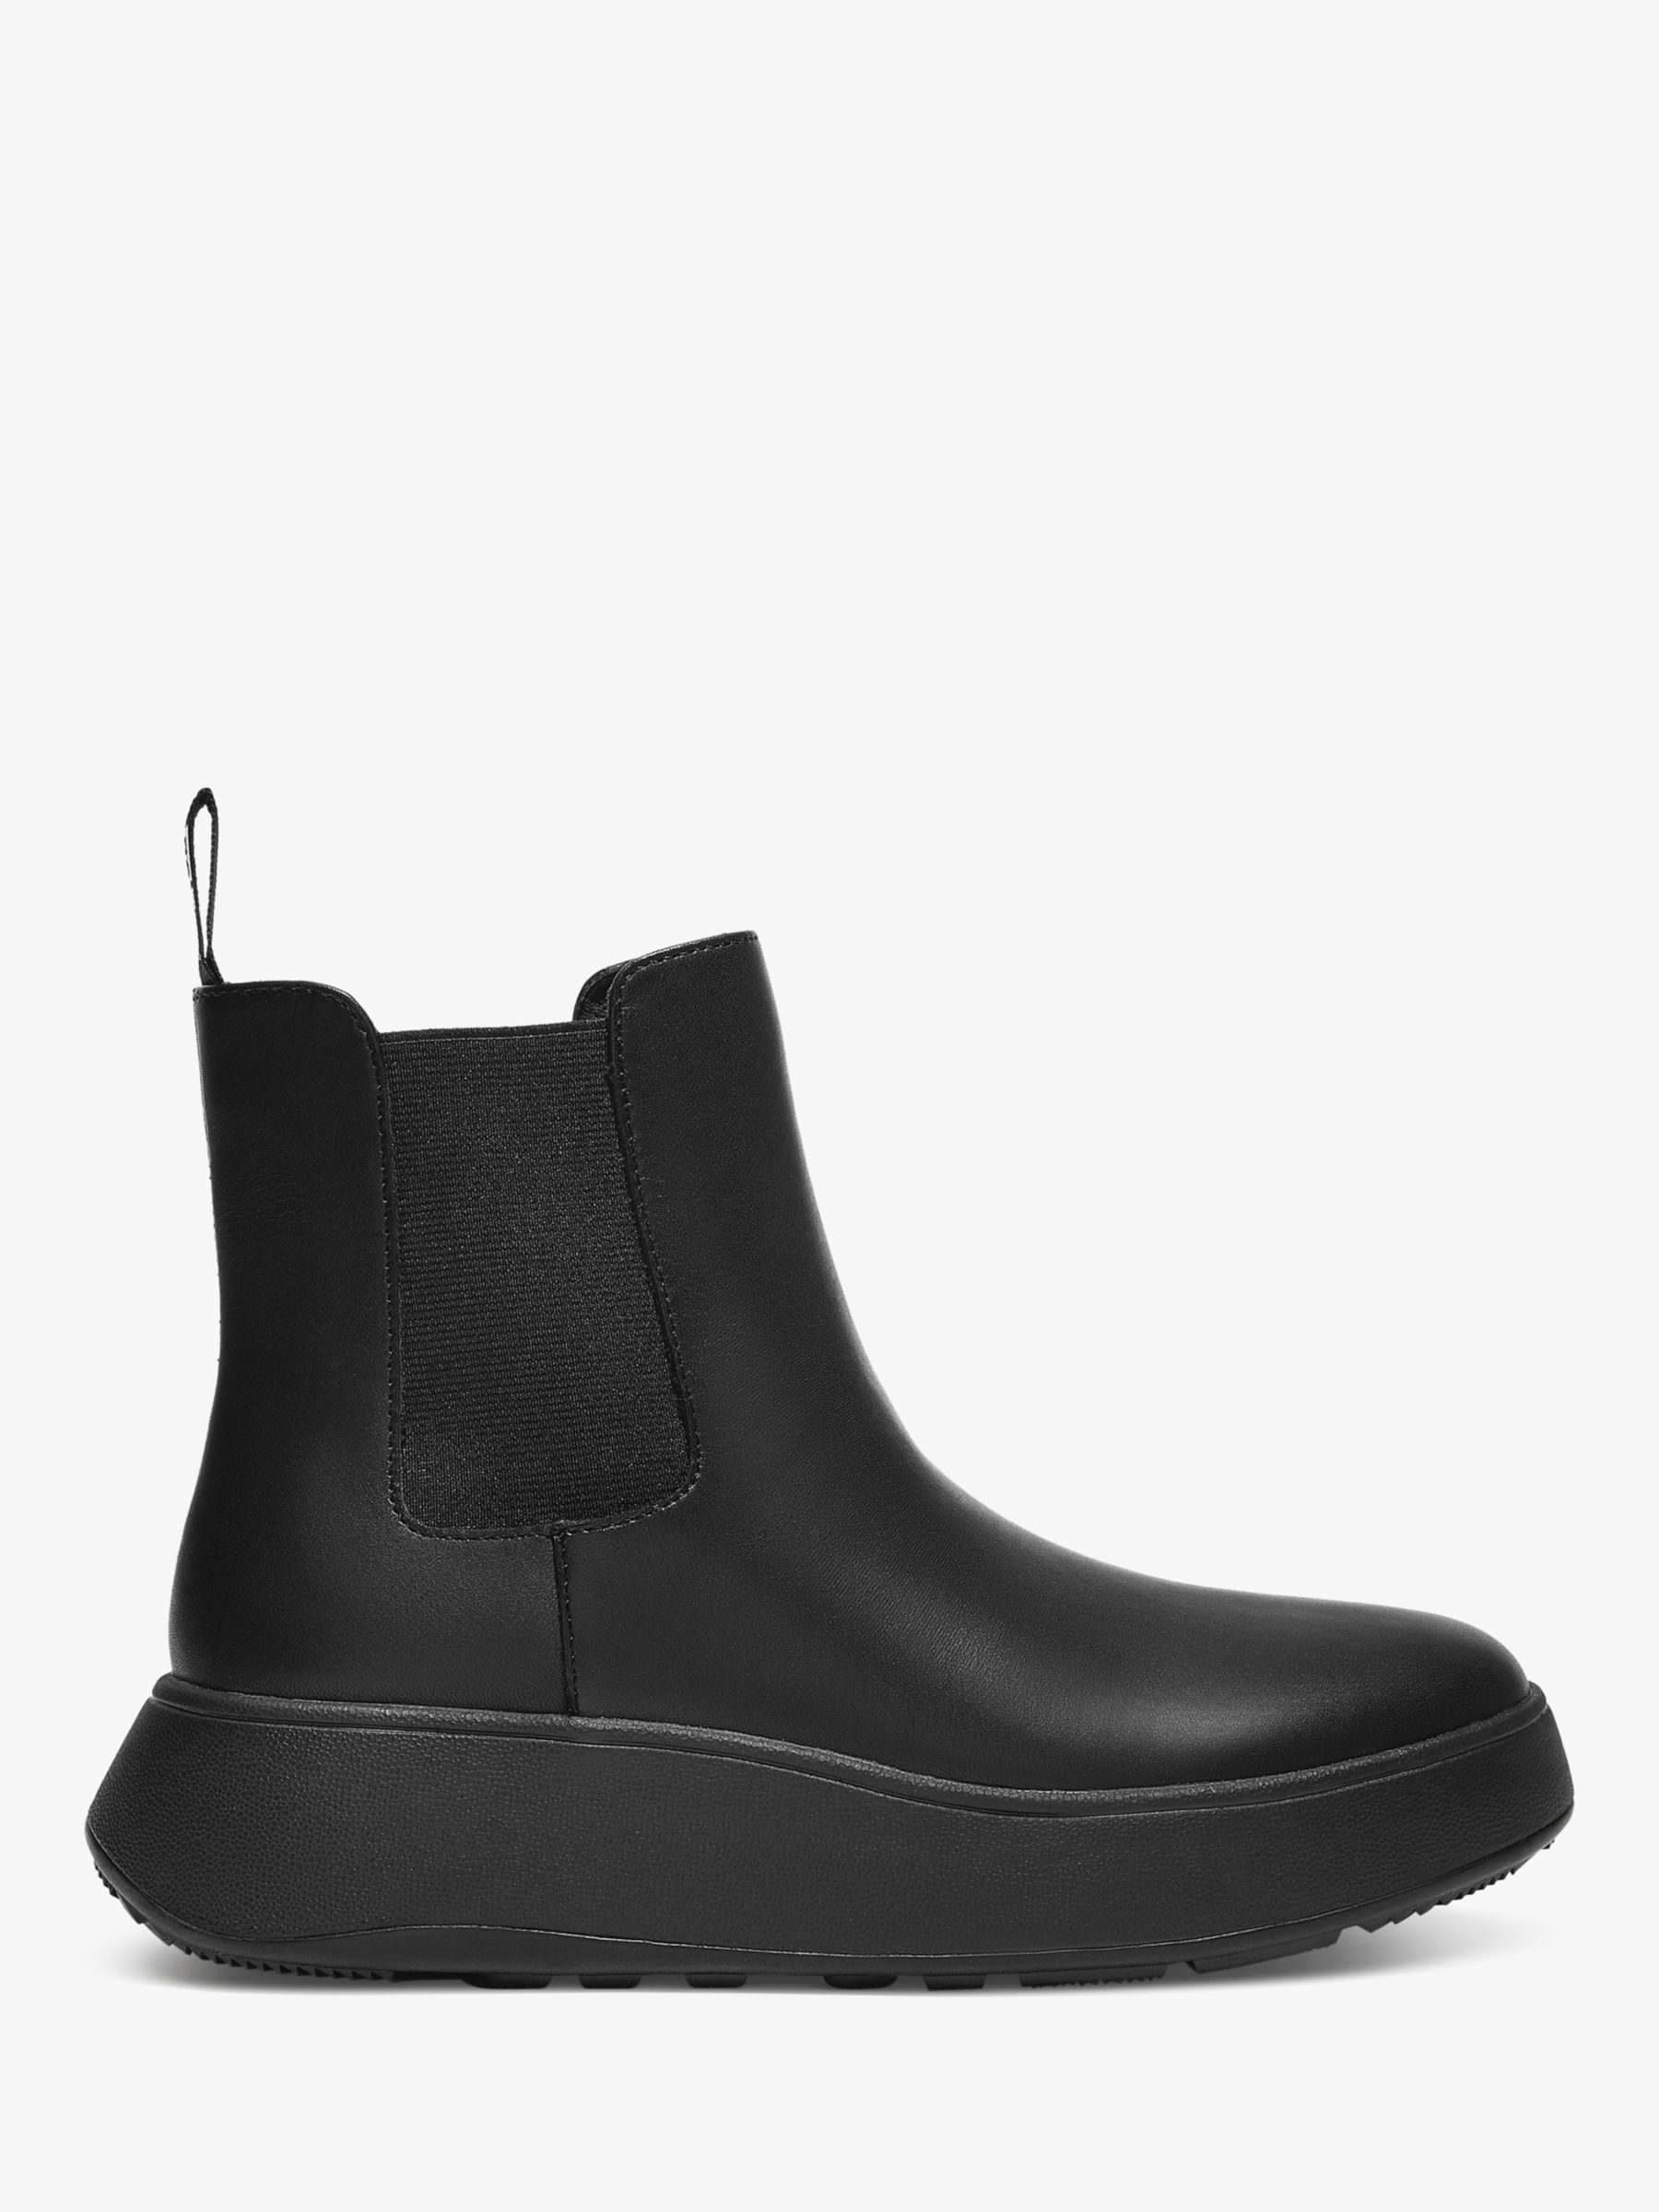 FitFlop Flatform Leather Ankle Boots, All Black at John Lewis & Partners